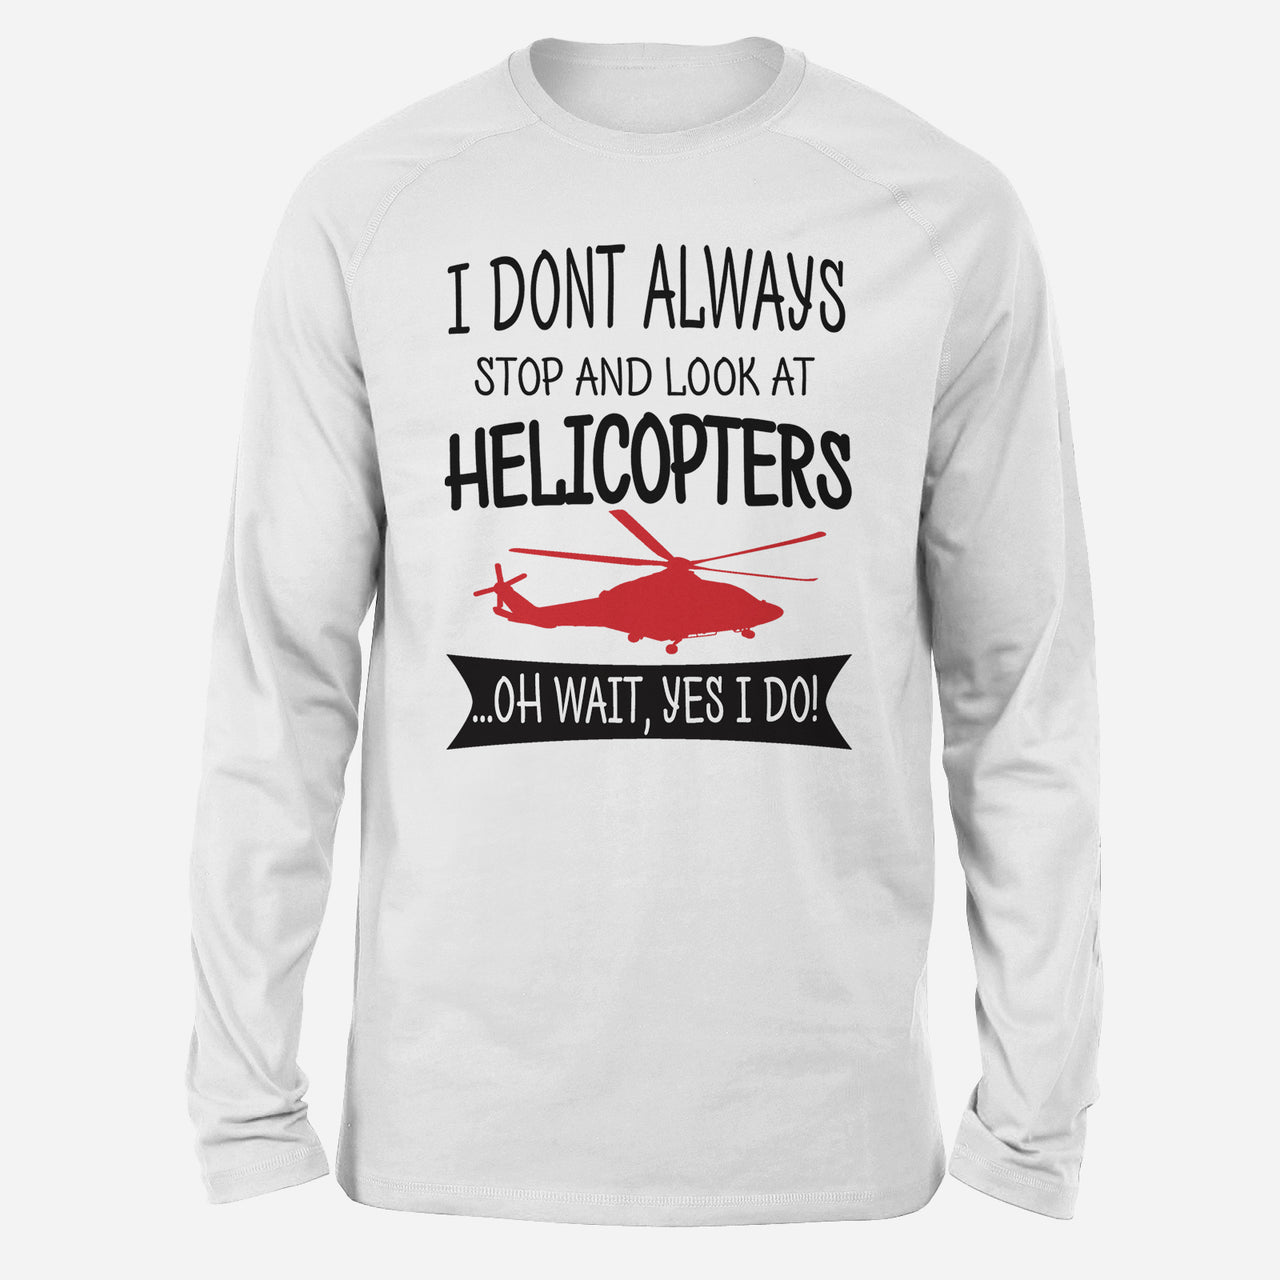 I Don't Always Stop and Look at Helicopters Designed Long-Sleeve T-Shirts